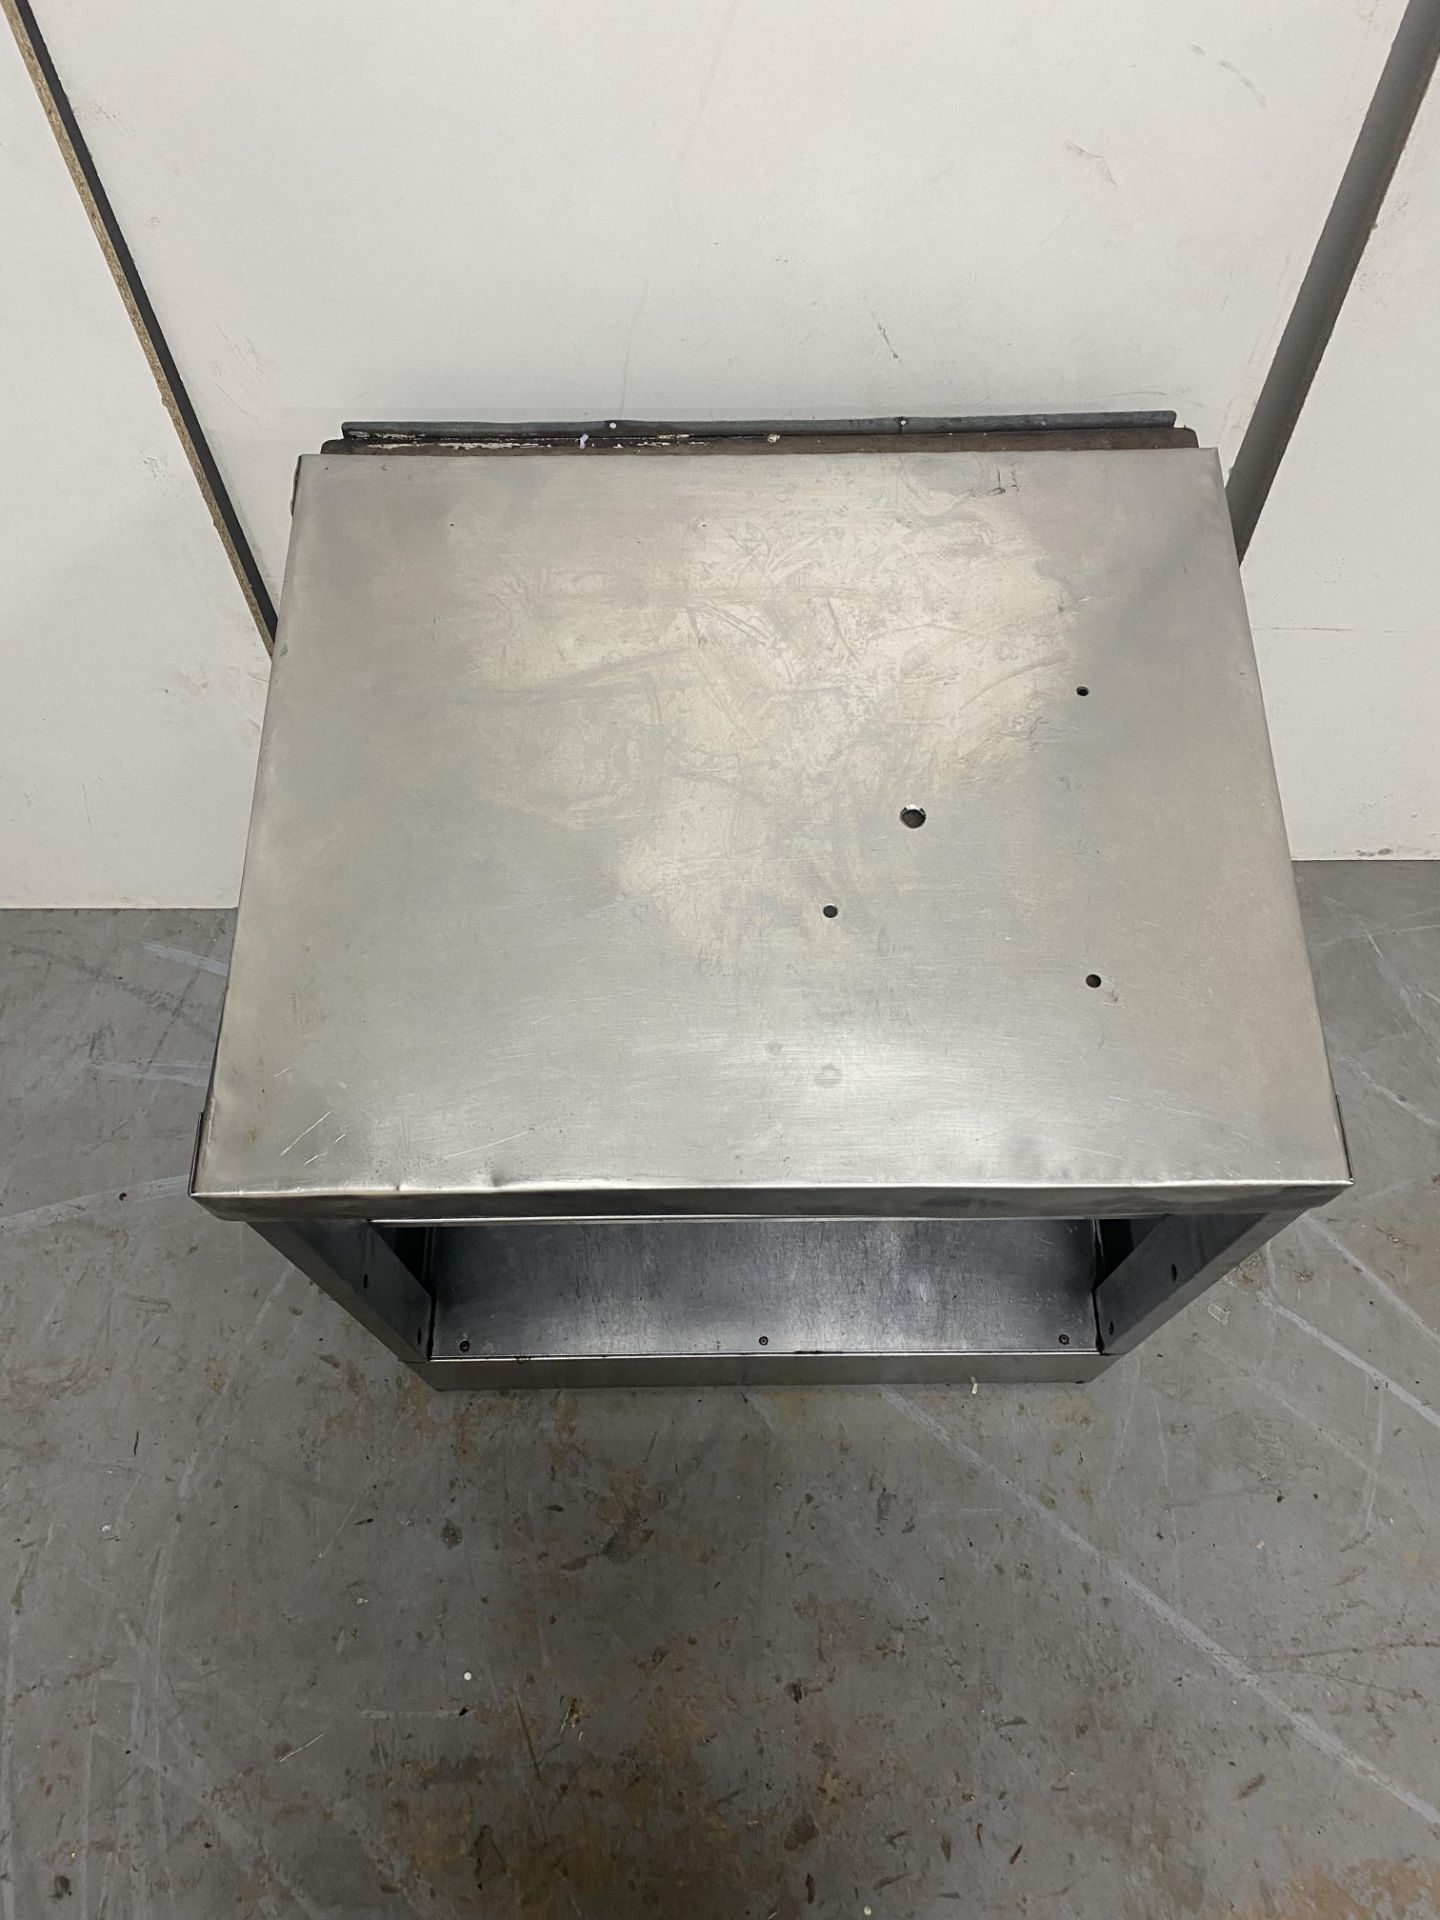 2 Tier Stainless Steel Catering Preperation Shelving Unit - Bild 3 aus 6